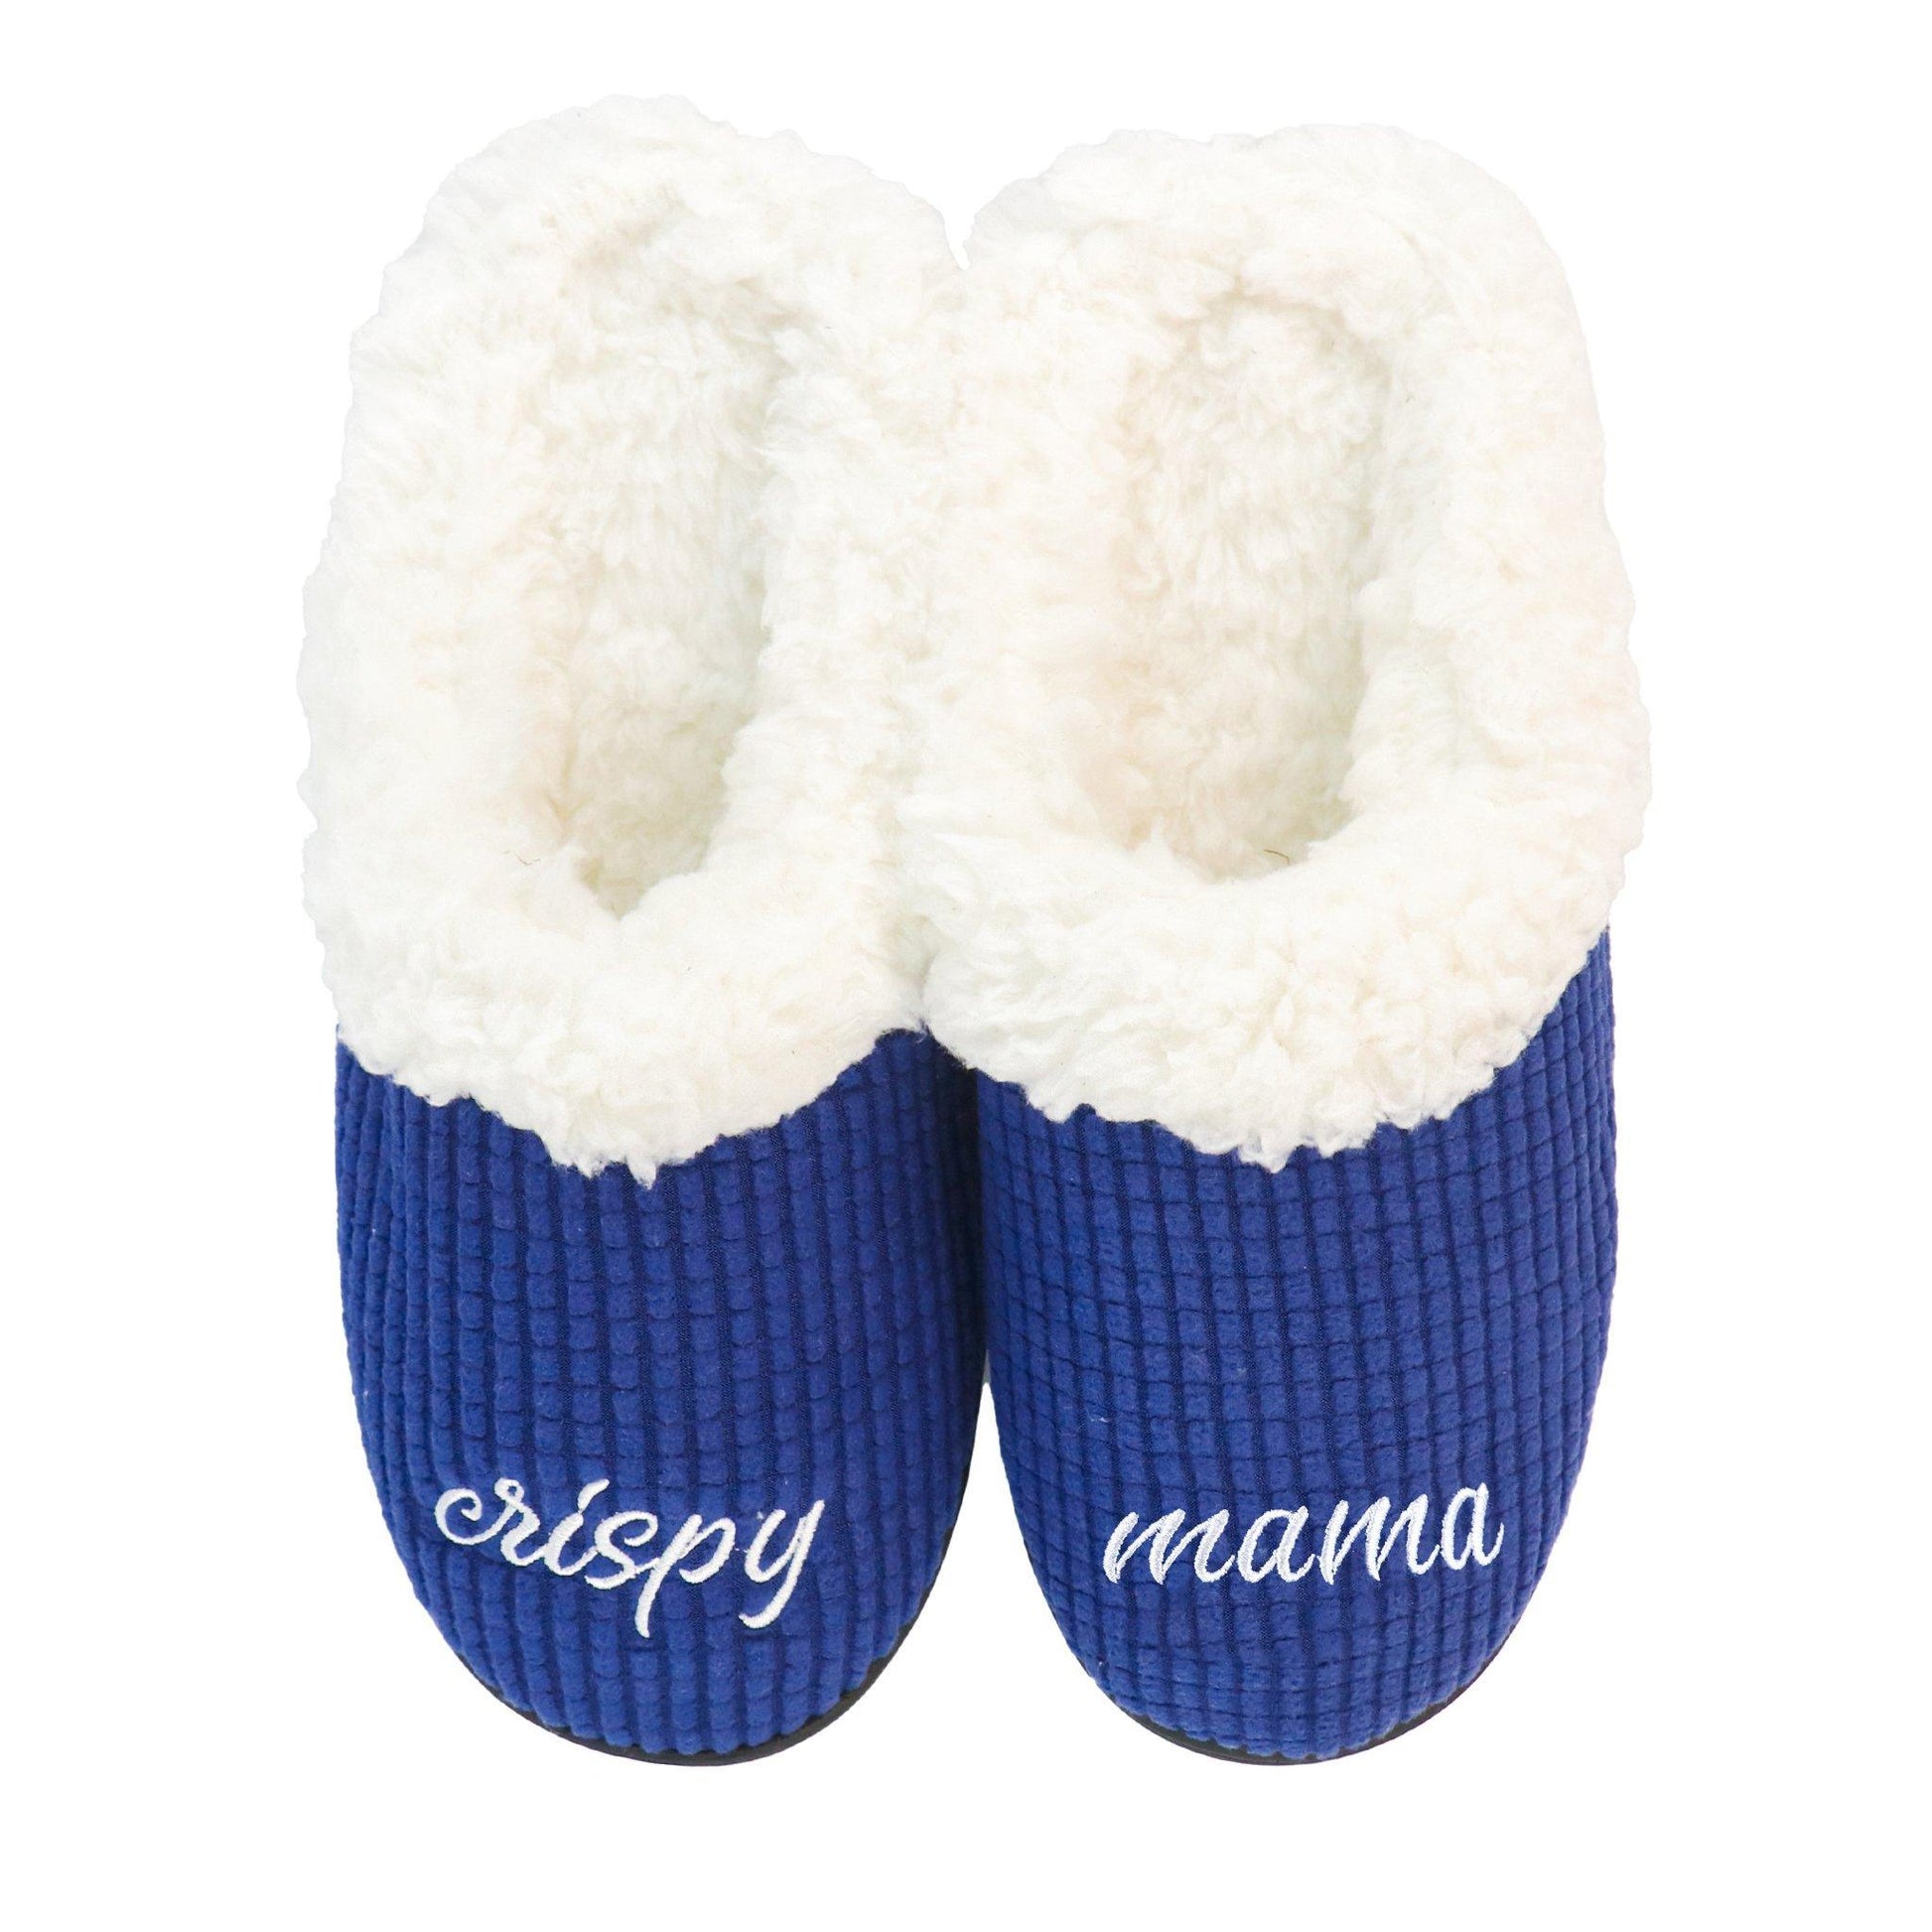 blue and white bud light slippers that say crispy on the right slipper and mama on the left